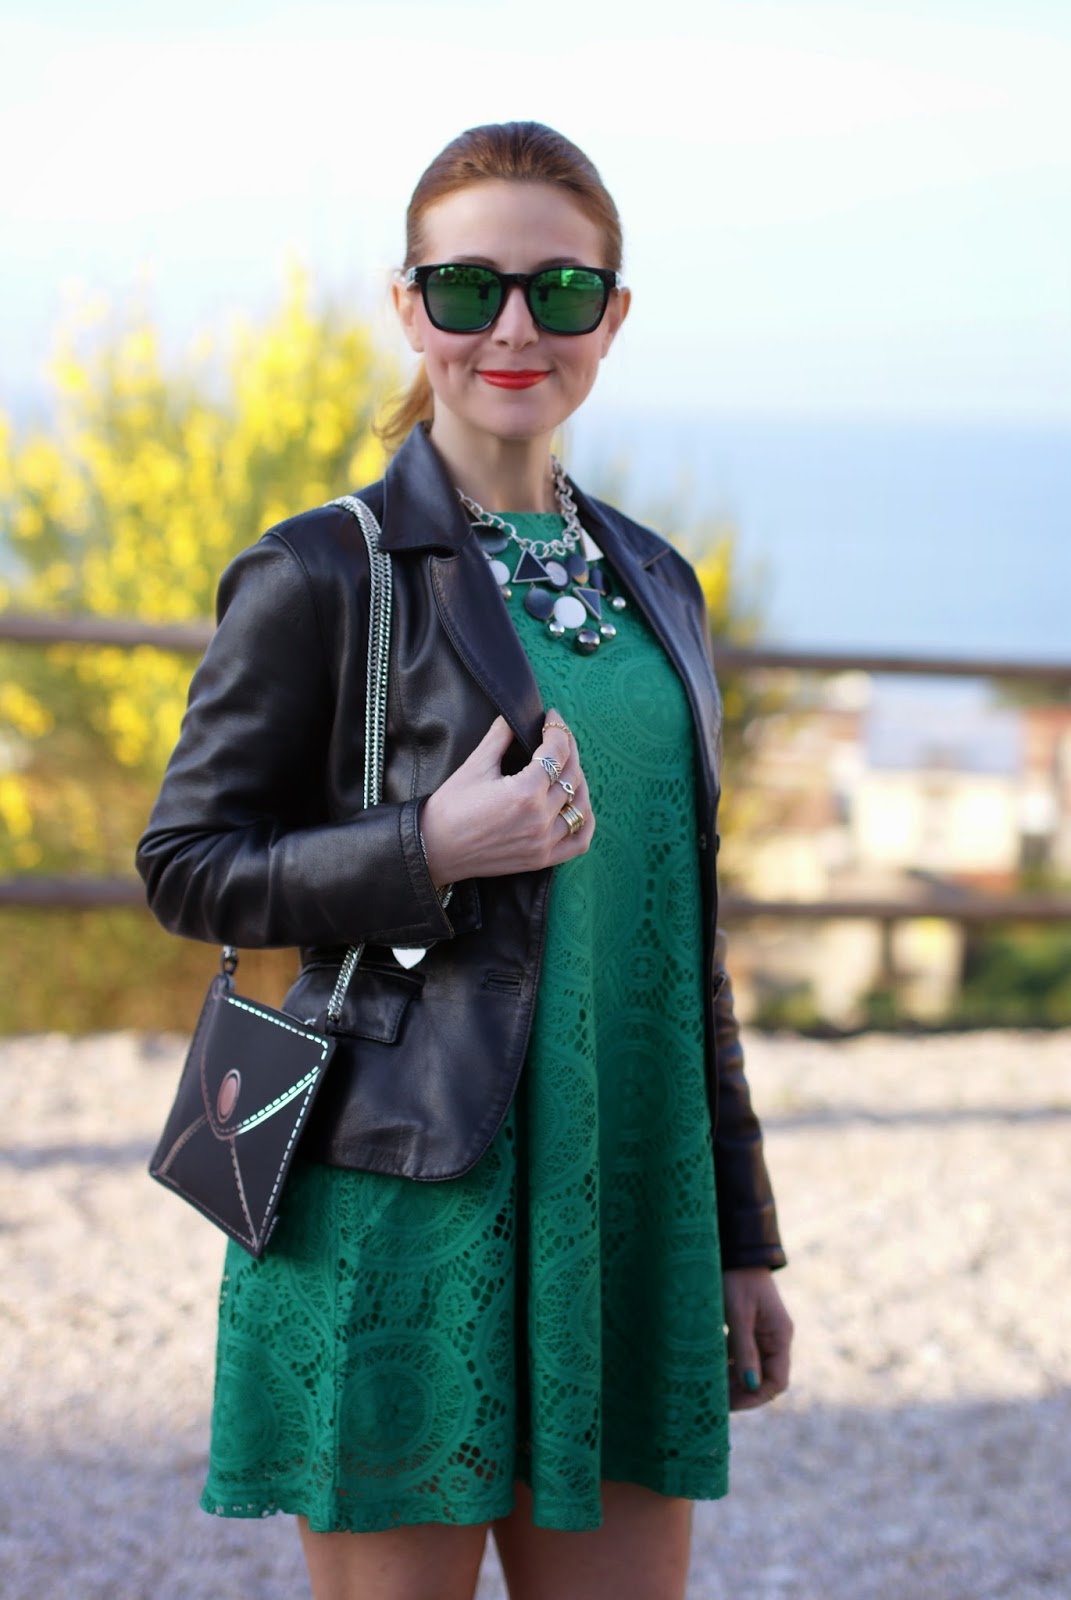 Vitti Ferria Contin collana, Today I'm me evening bag, Sheinside green lace dress, Fashion and Cookies, fashion blogger